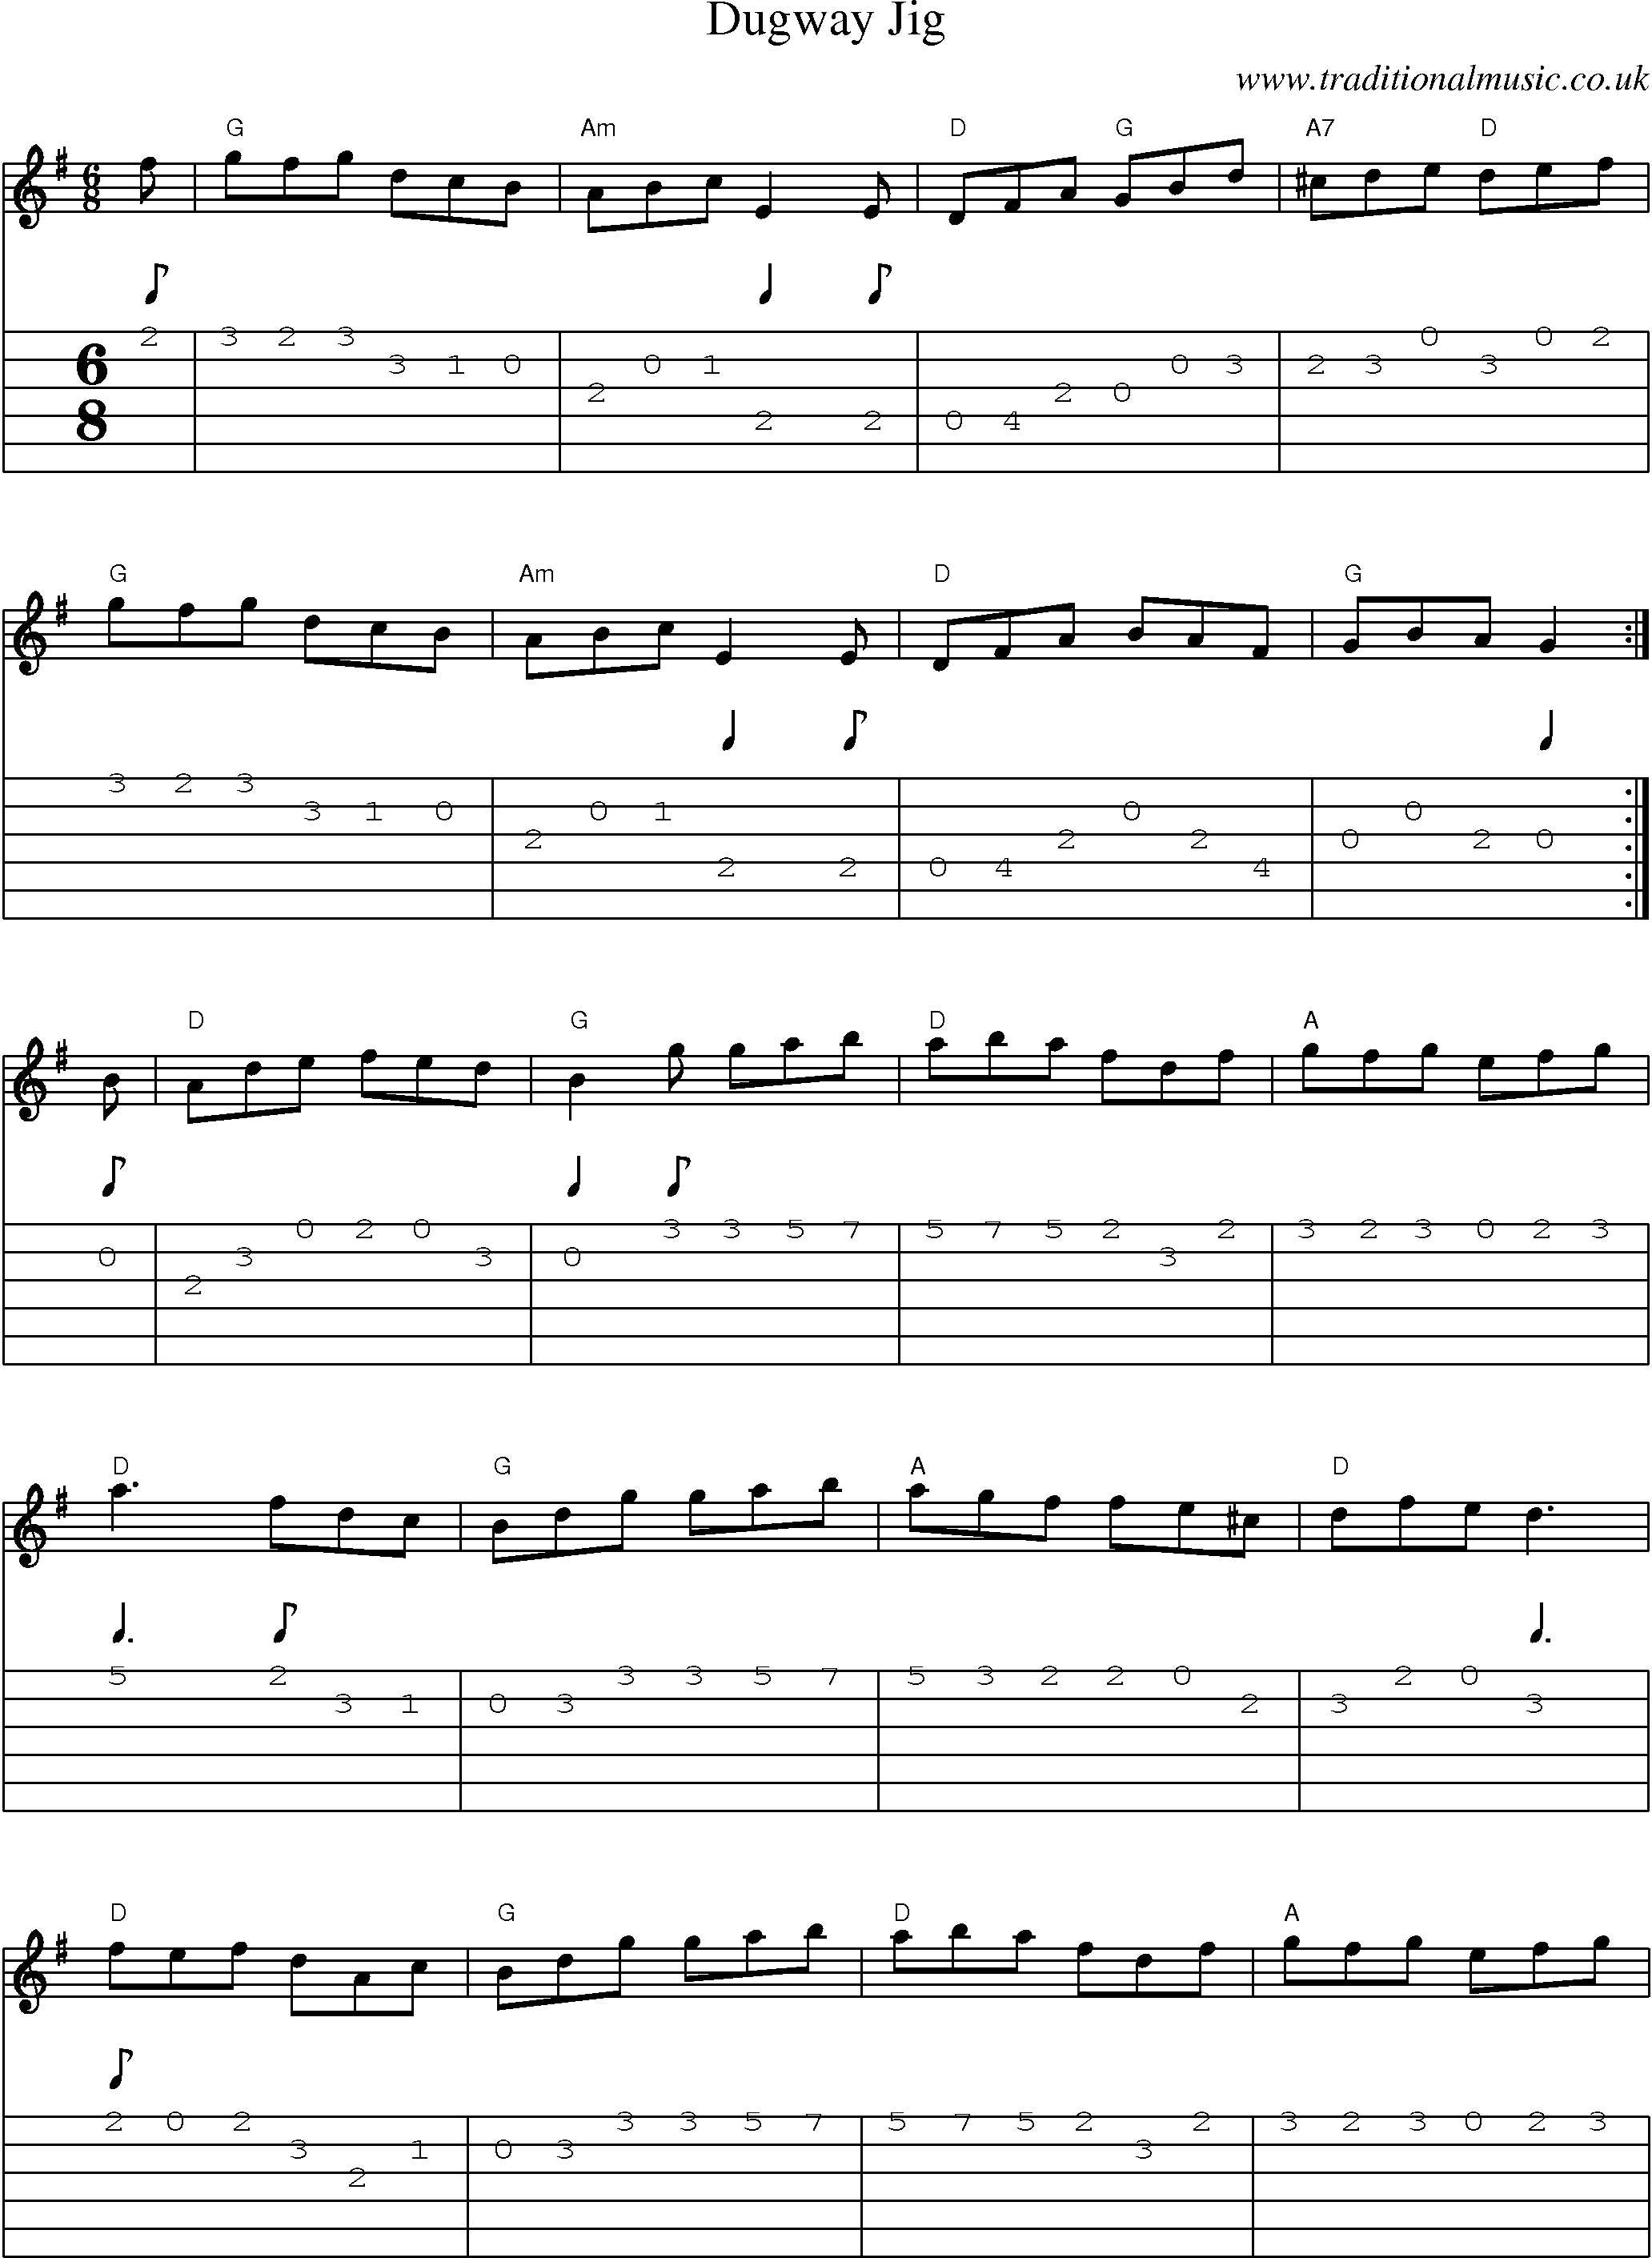 Music Score and Guitar Tabs for Dugway Jig